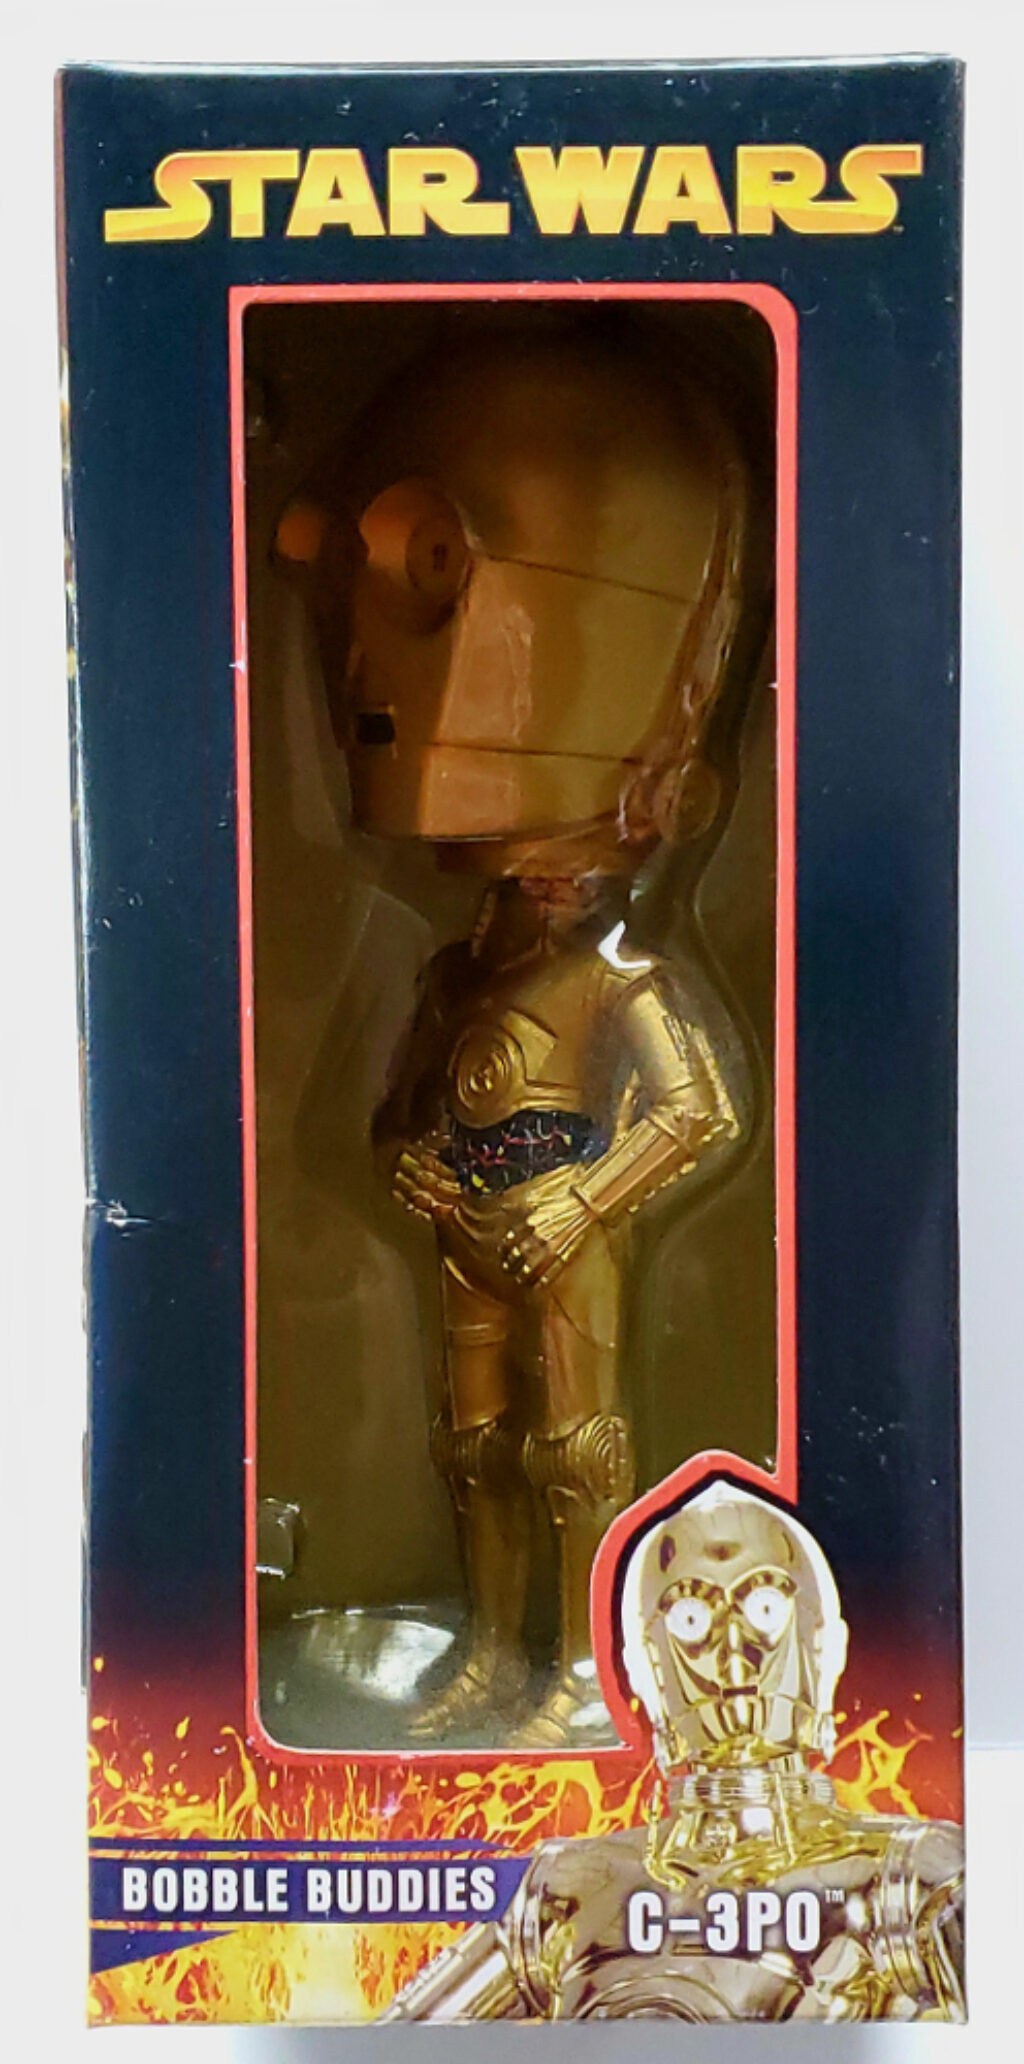 Star Wars C-3PO Bobble Buddies Bobble-Head from Cards Inc 1